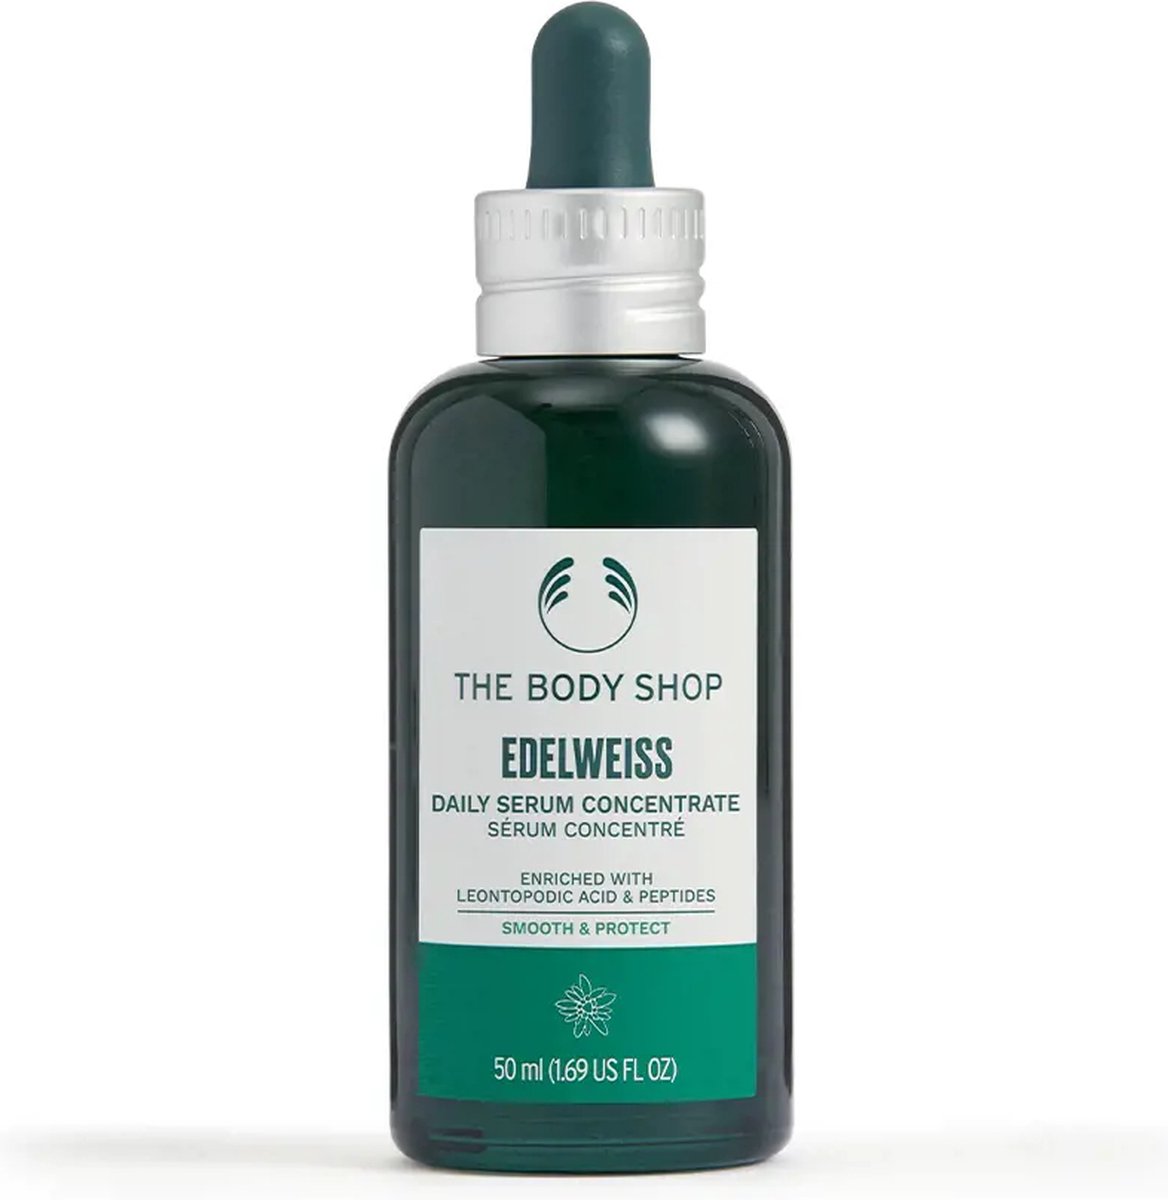 The Body Shop Edelweiss Daily Serum Concentrate 50 Ml